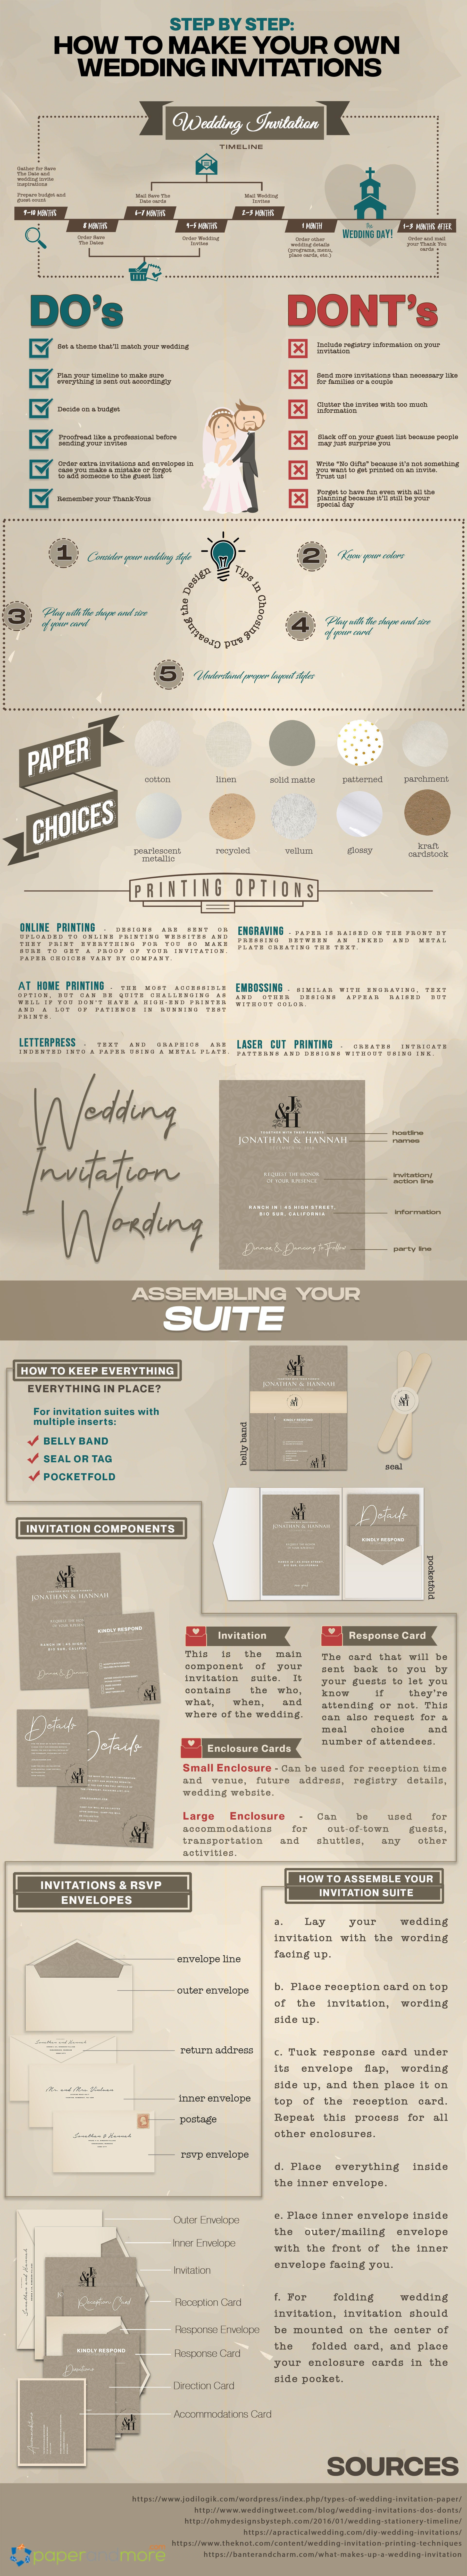 Step-by-Step: How to Make Your Own Wedding Invitations